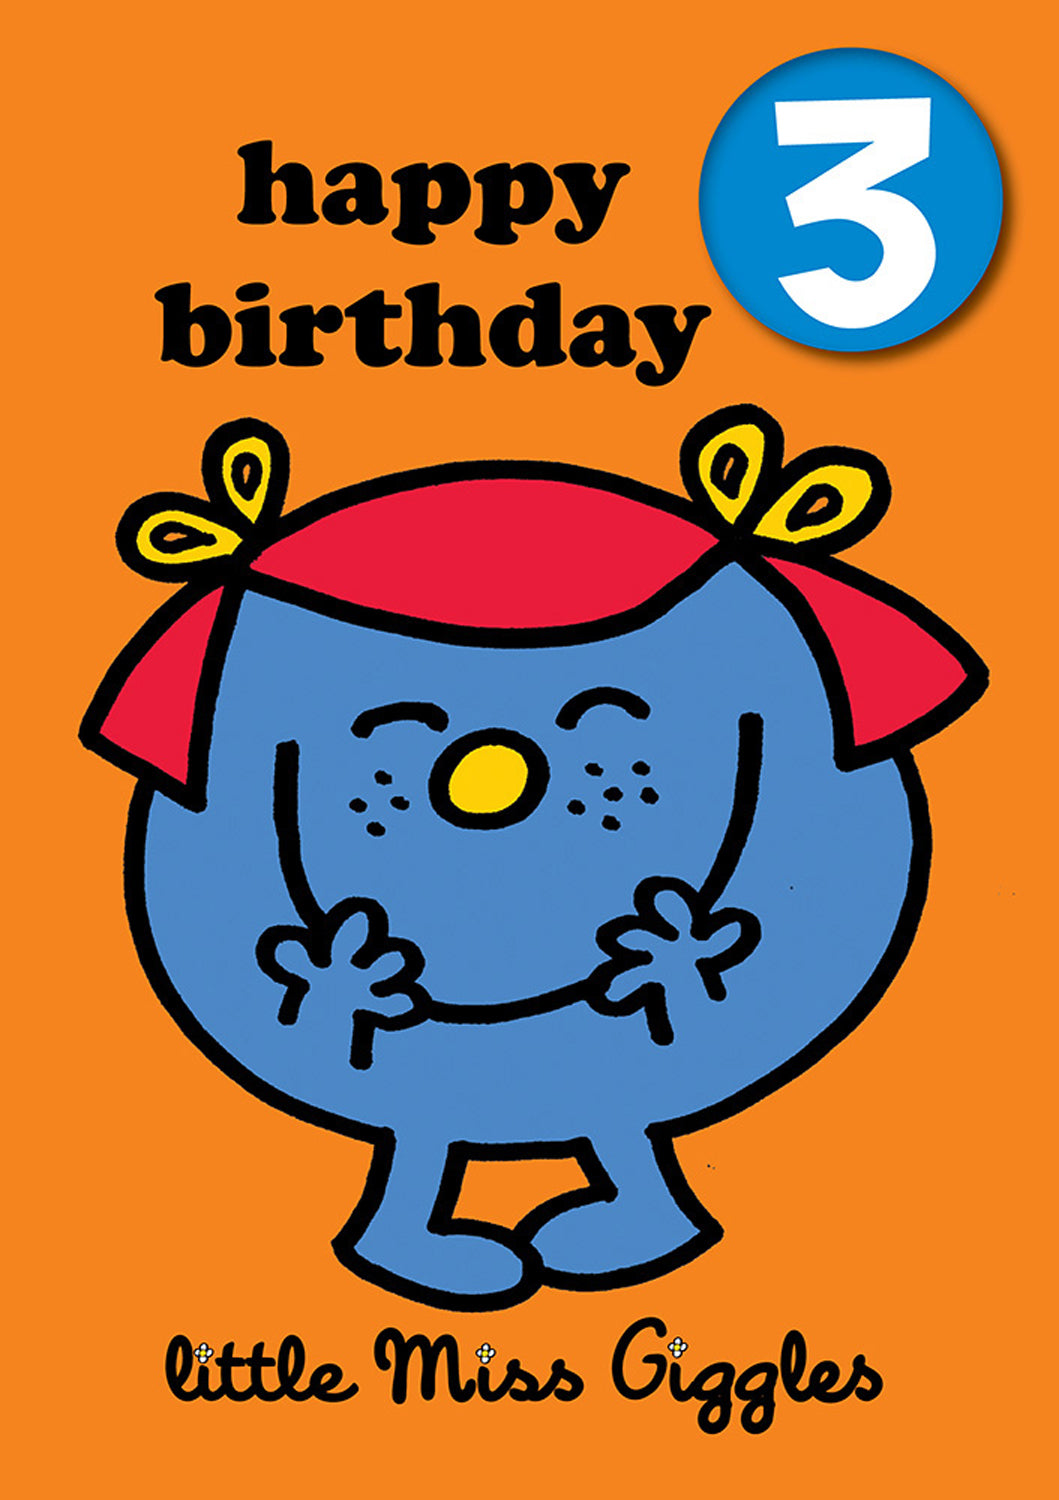 Greeting Card: Mr. Men and Little Miss - Little Miss Giggles Age 3 Badge